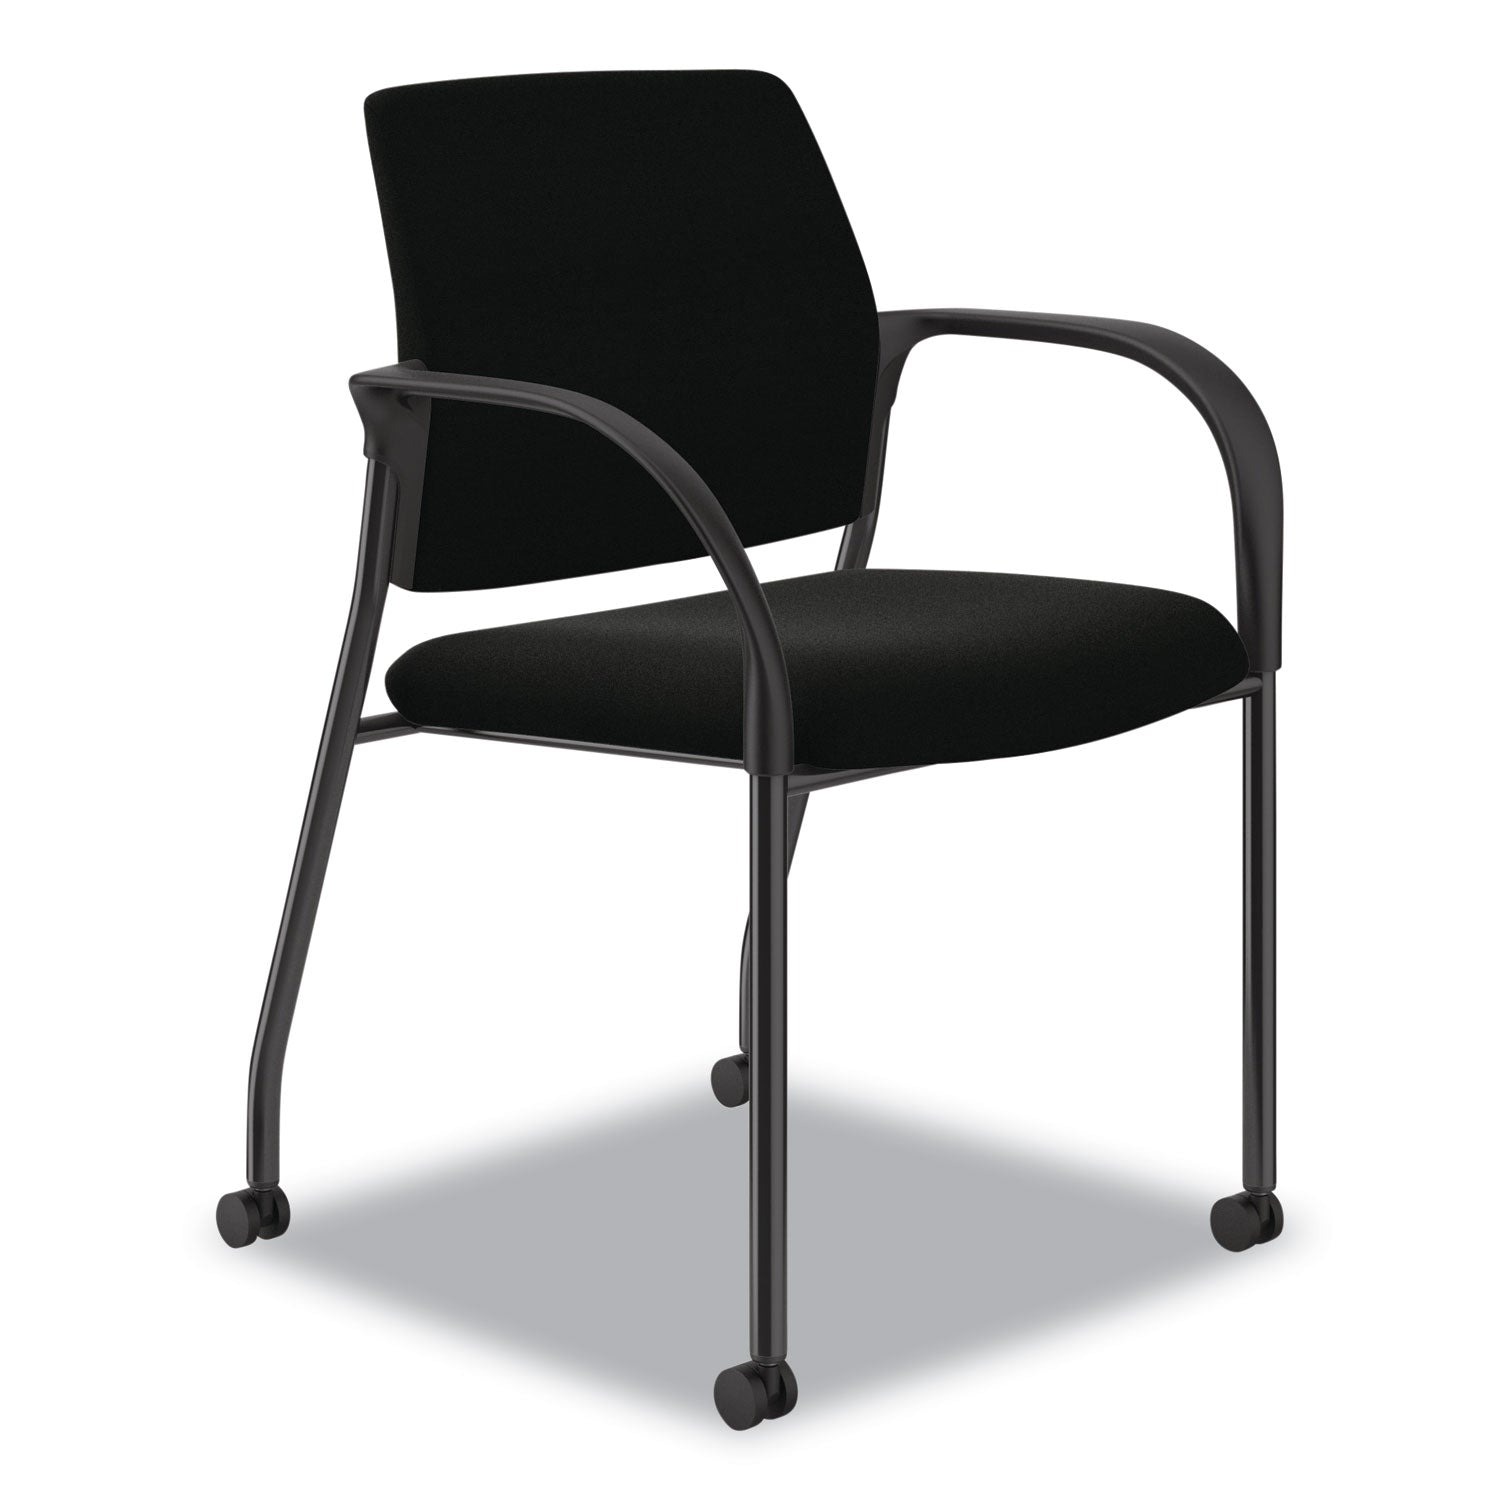 ignition-series-guest-chair-with-arms-polyurethane-fabric-seat-25-x-2175-x-335-black-ships-in-7-10-business-days_honis109hur10 - 1